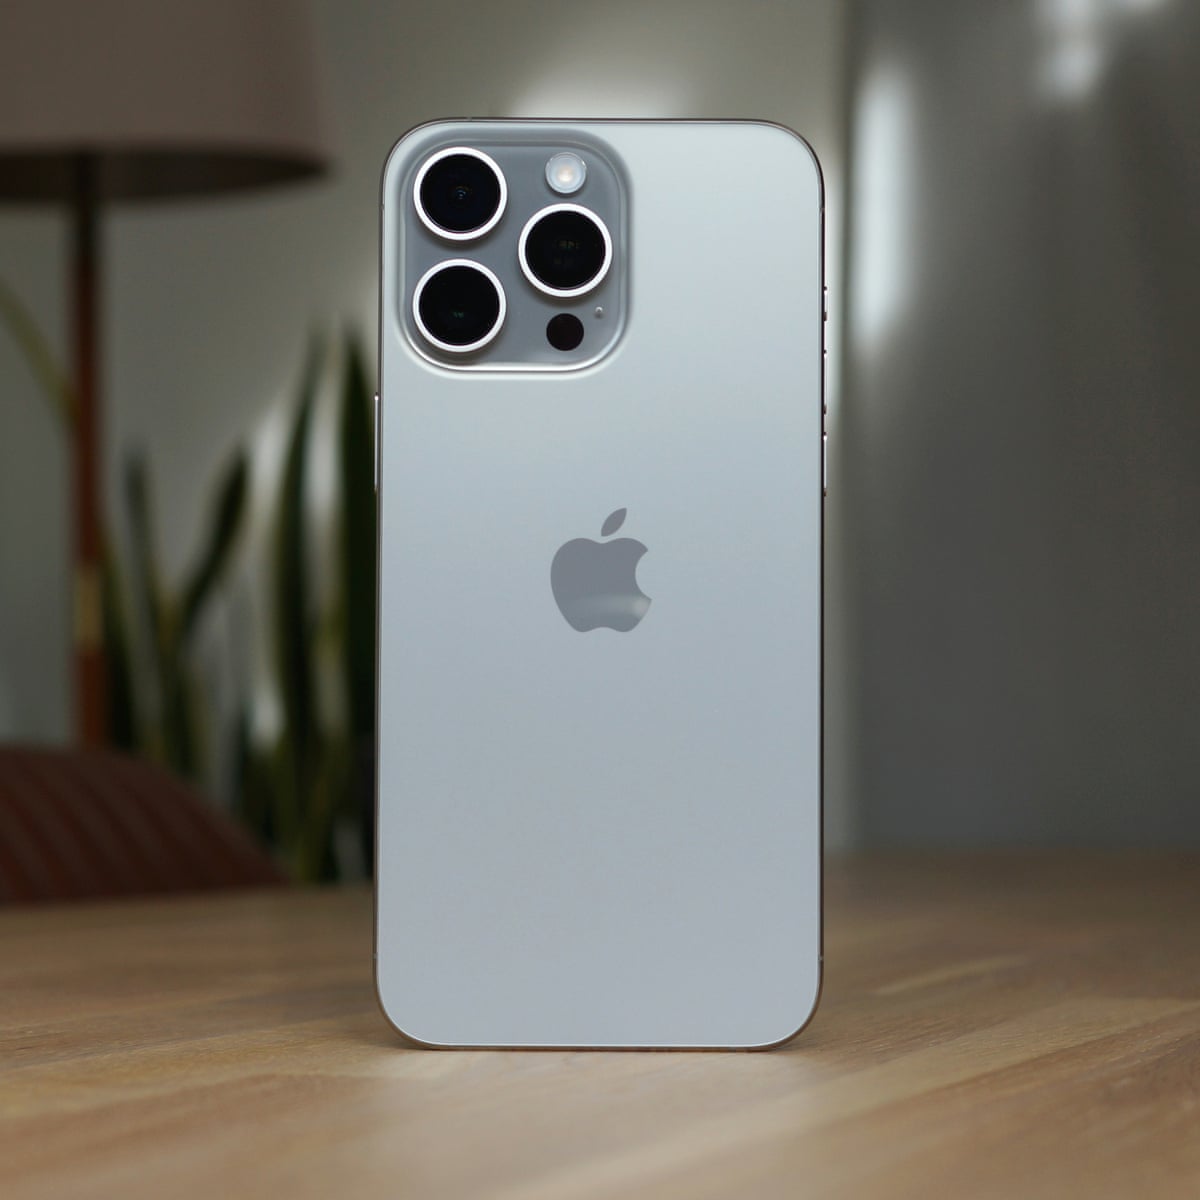 iPhone 15 Pro Max review: Apple's superphone weighs less and zooms further  | Apple | The Guardian